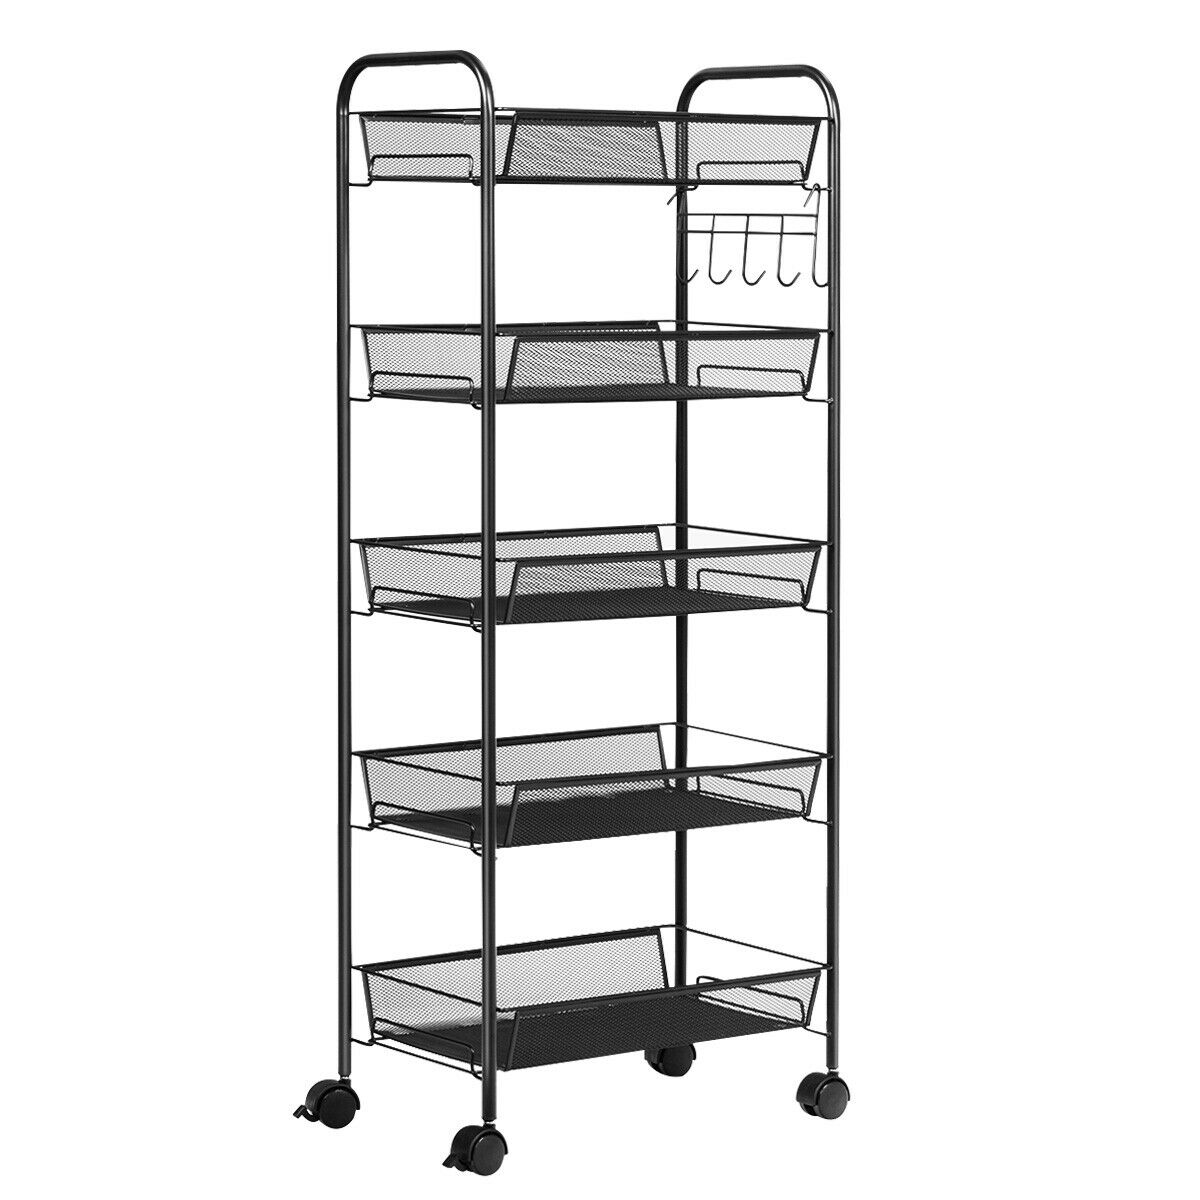 VEVOR 12W x 17D Pull Out Cabinet Organizer, Heavy Duty Slide Out Pantry Shelves, Chrome-Plated Steel Roll Out Drawers, Sliding Drawer Storage for